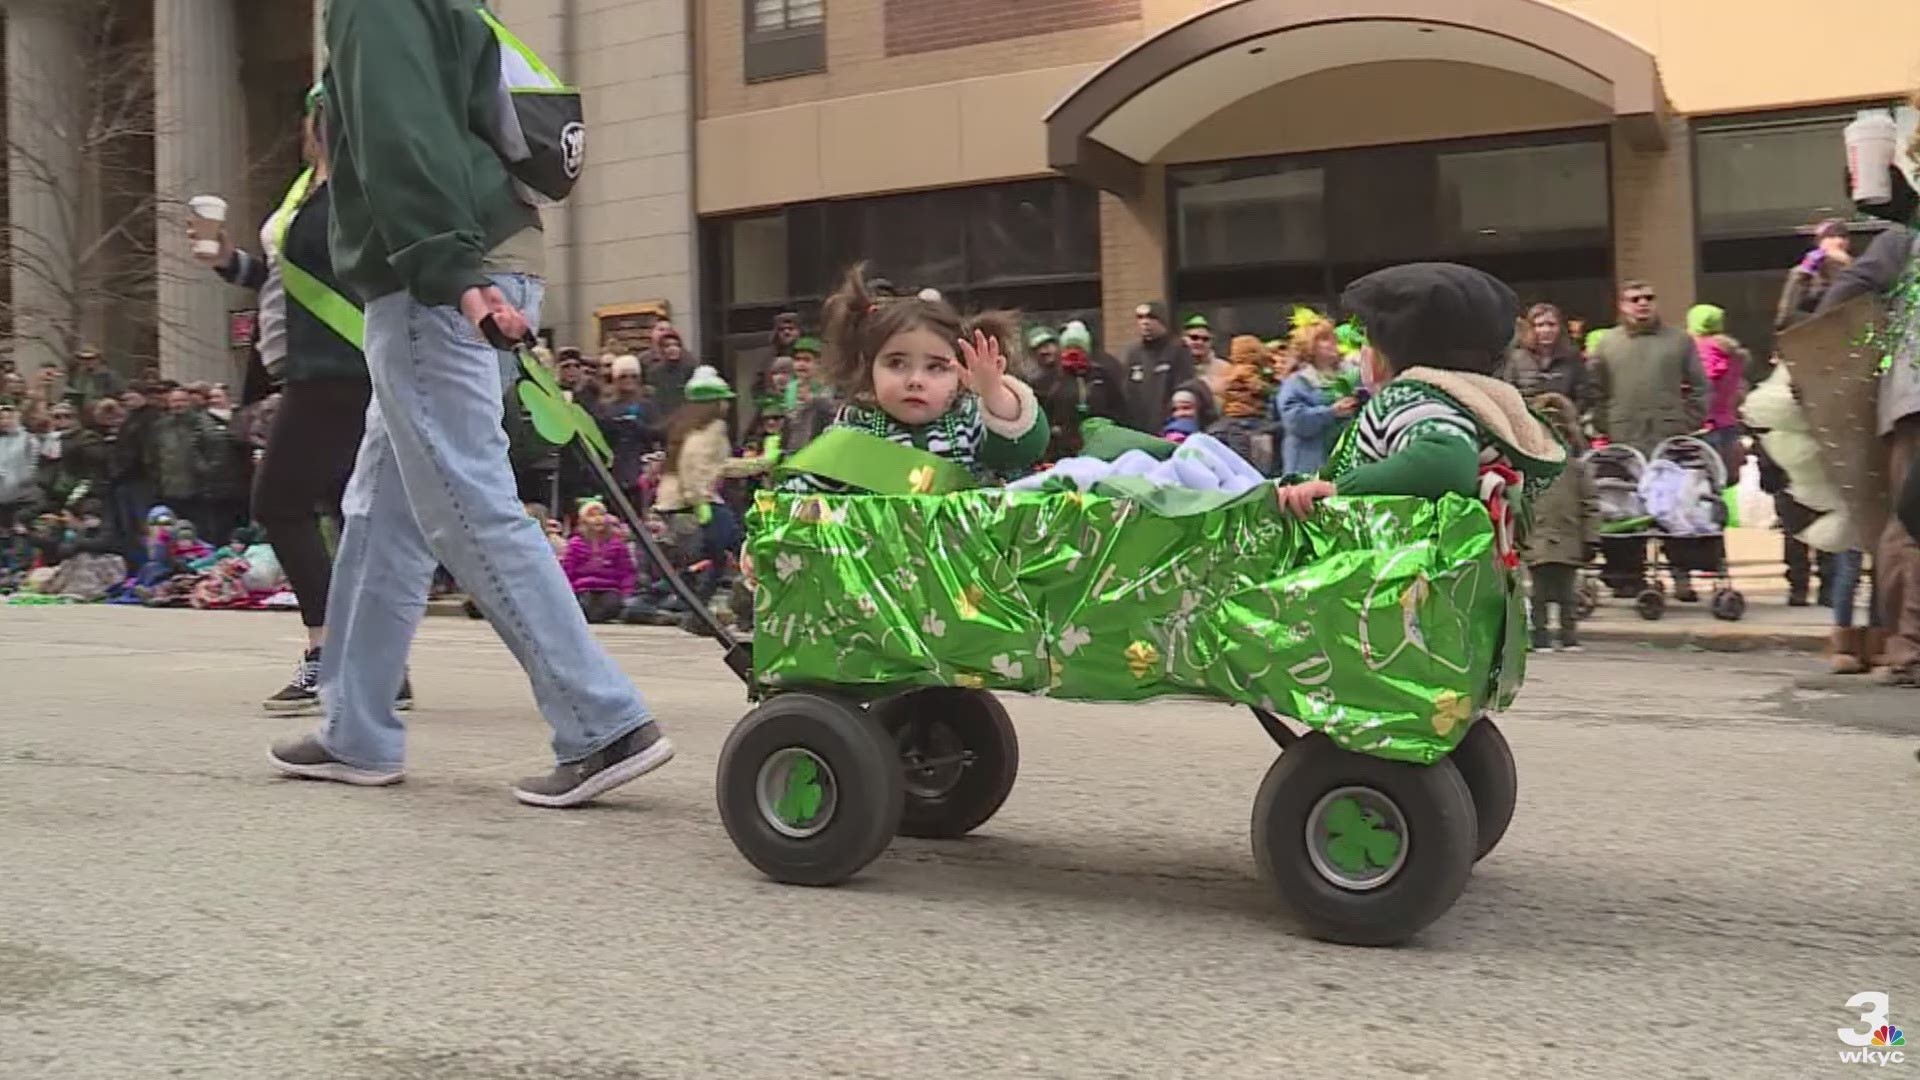 A day in pictures from Cleveland's St. Patrick's Day parade